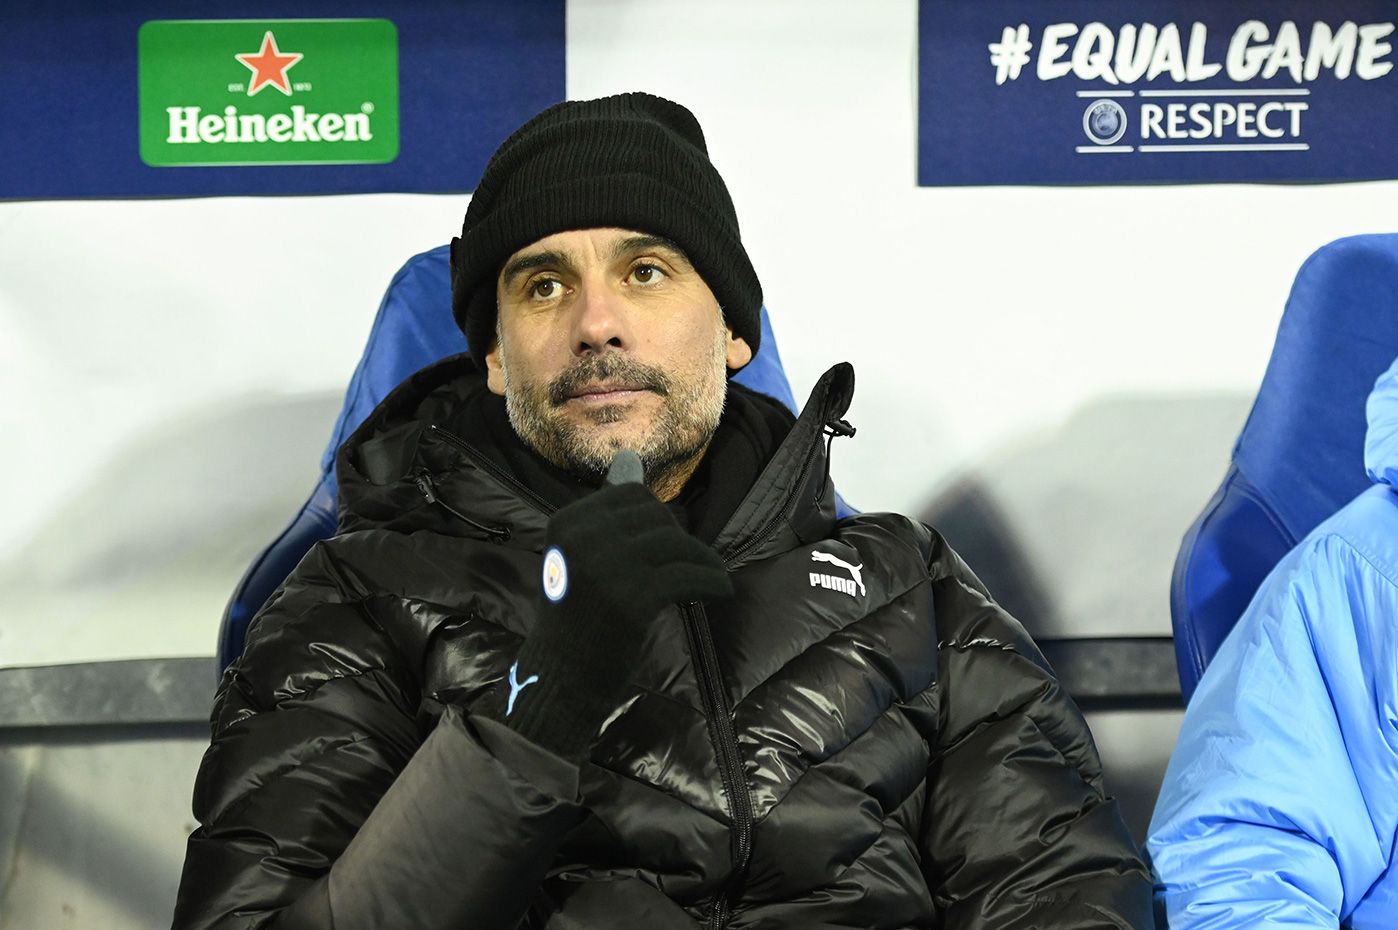 Pep Guardiola in the bench of the City